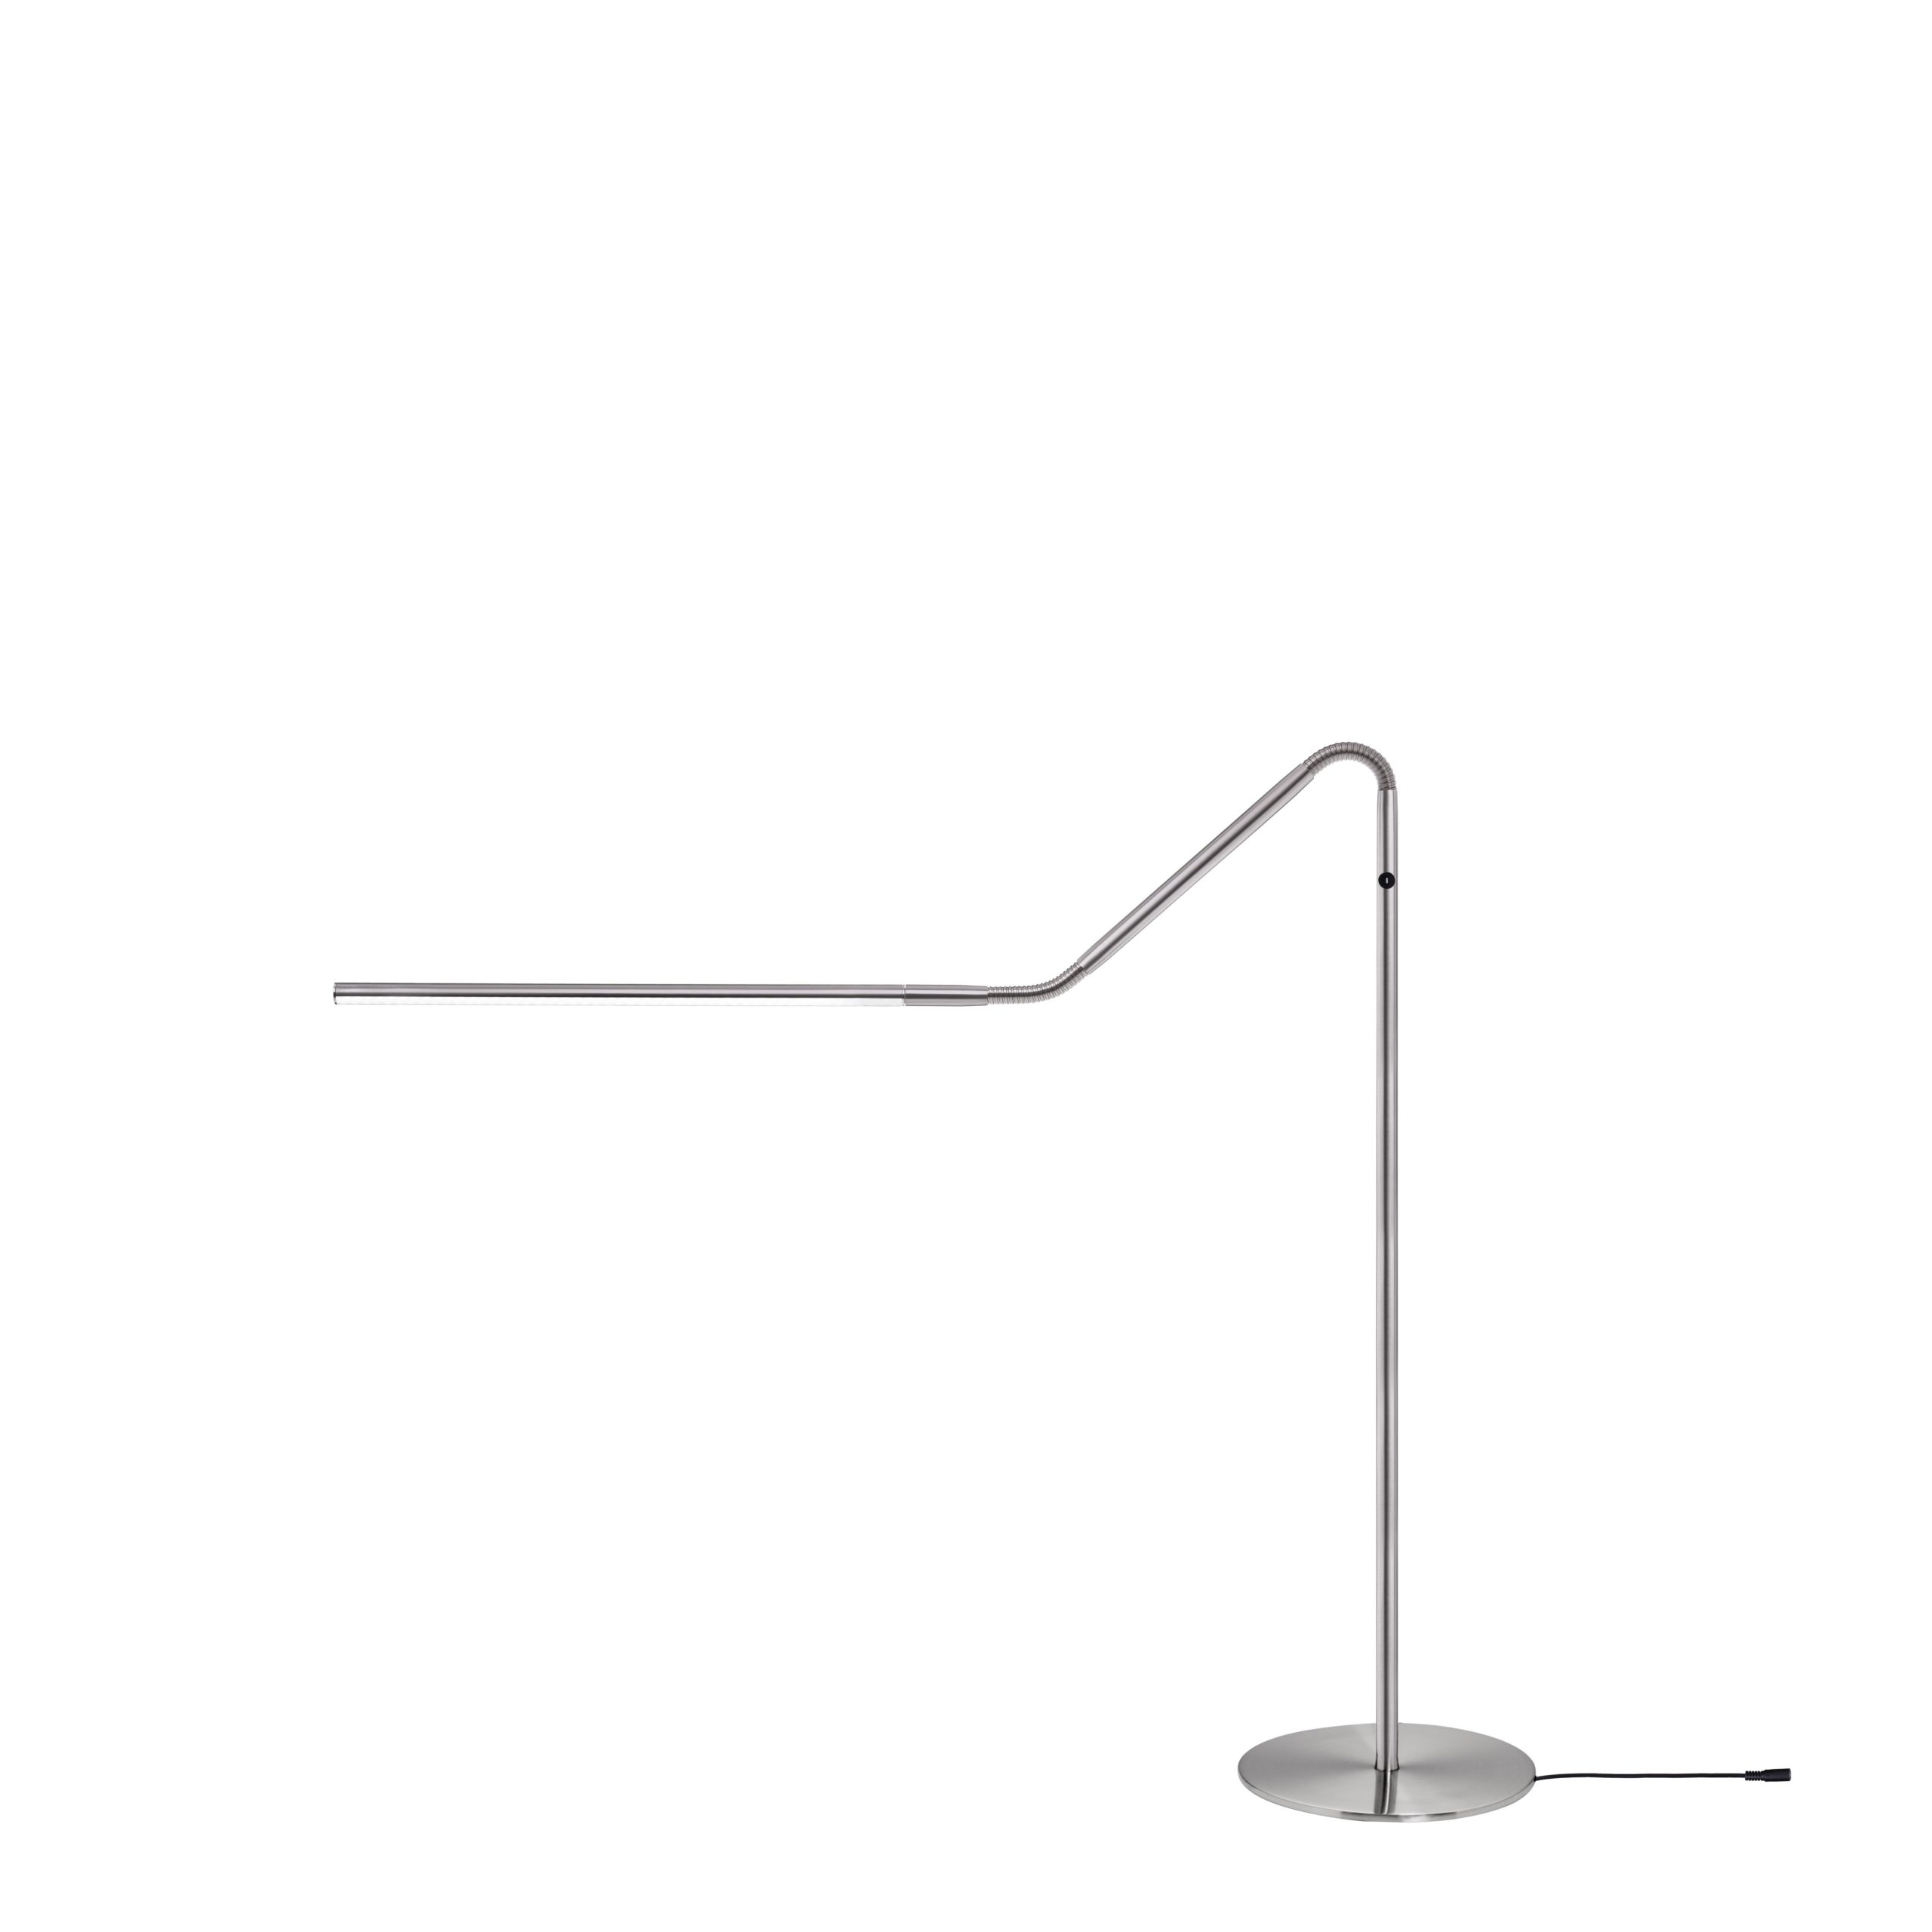 Daylight Slimline 3 Floor lamp with double bend down